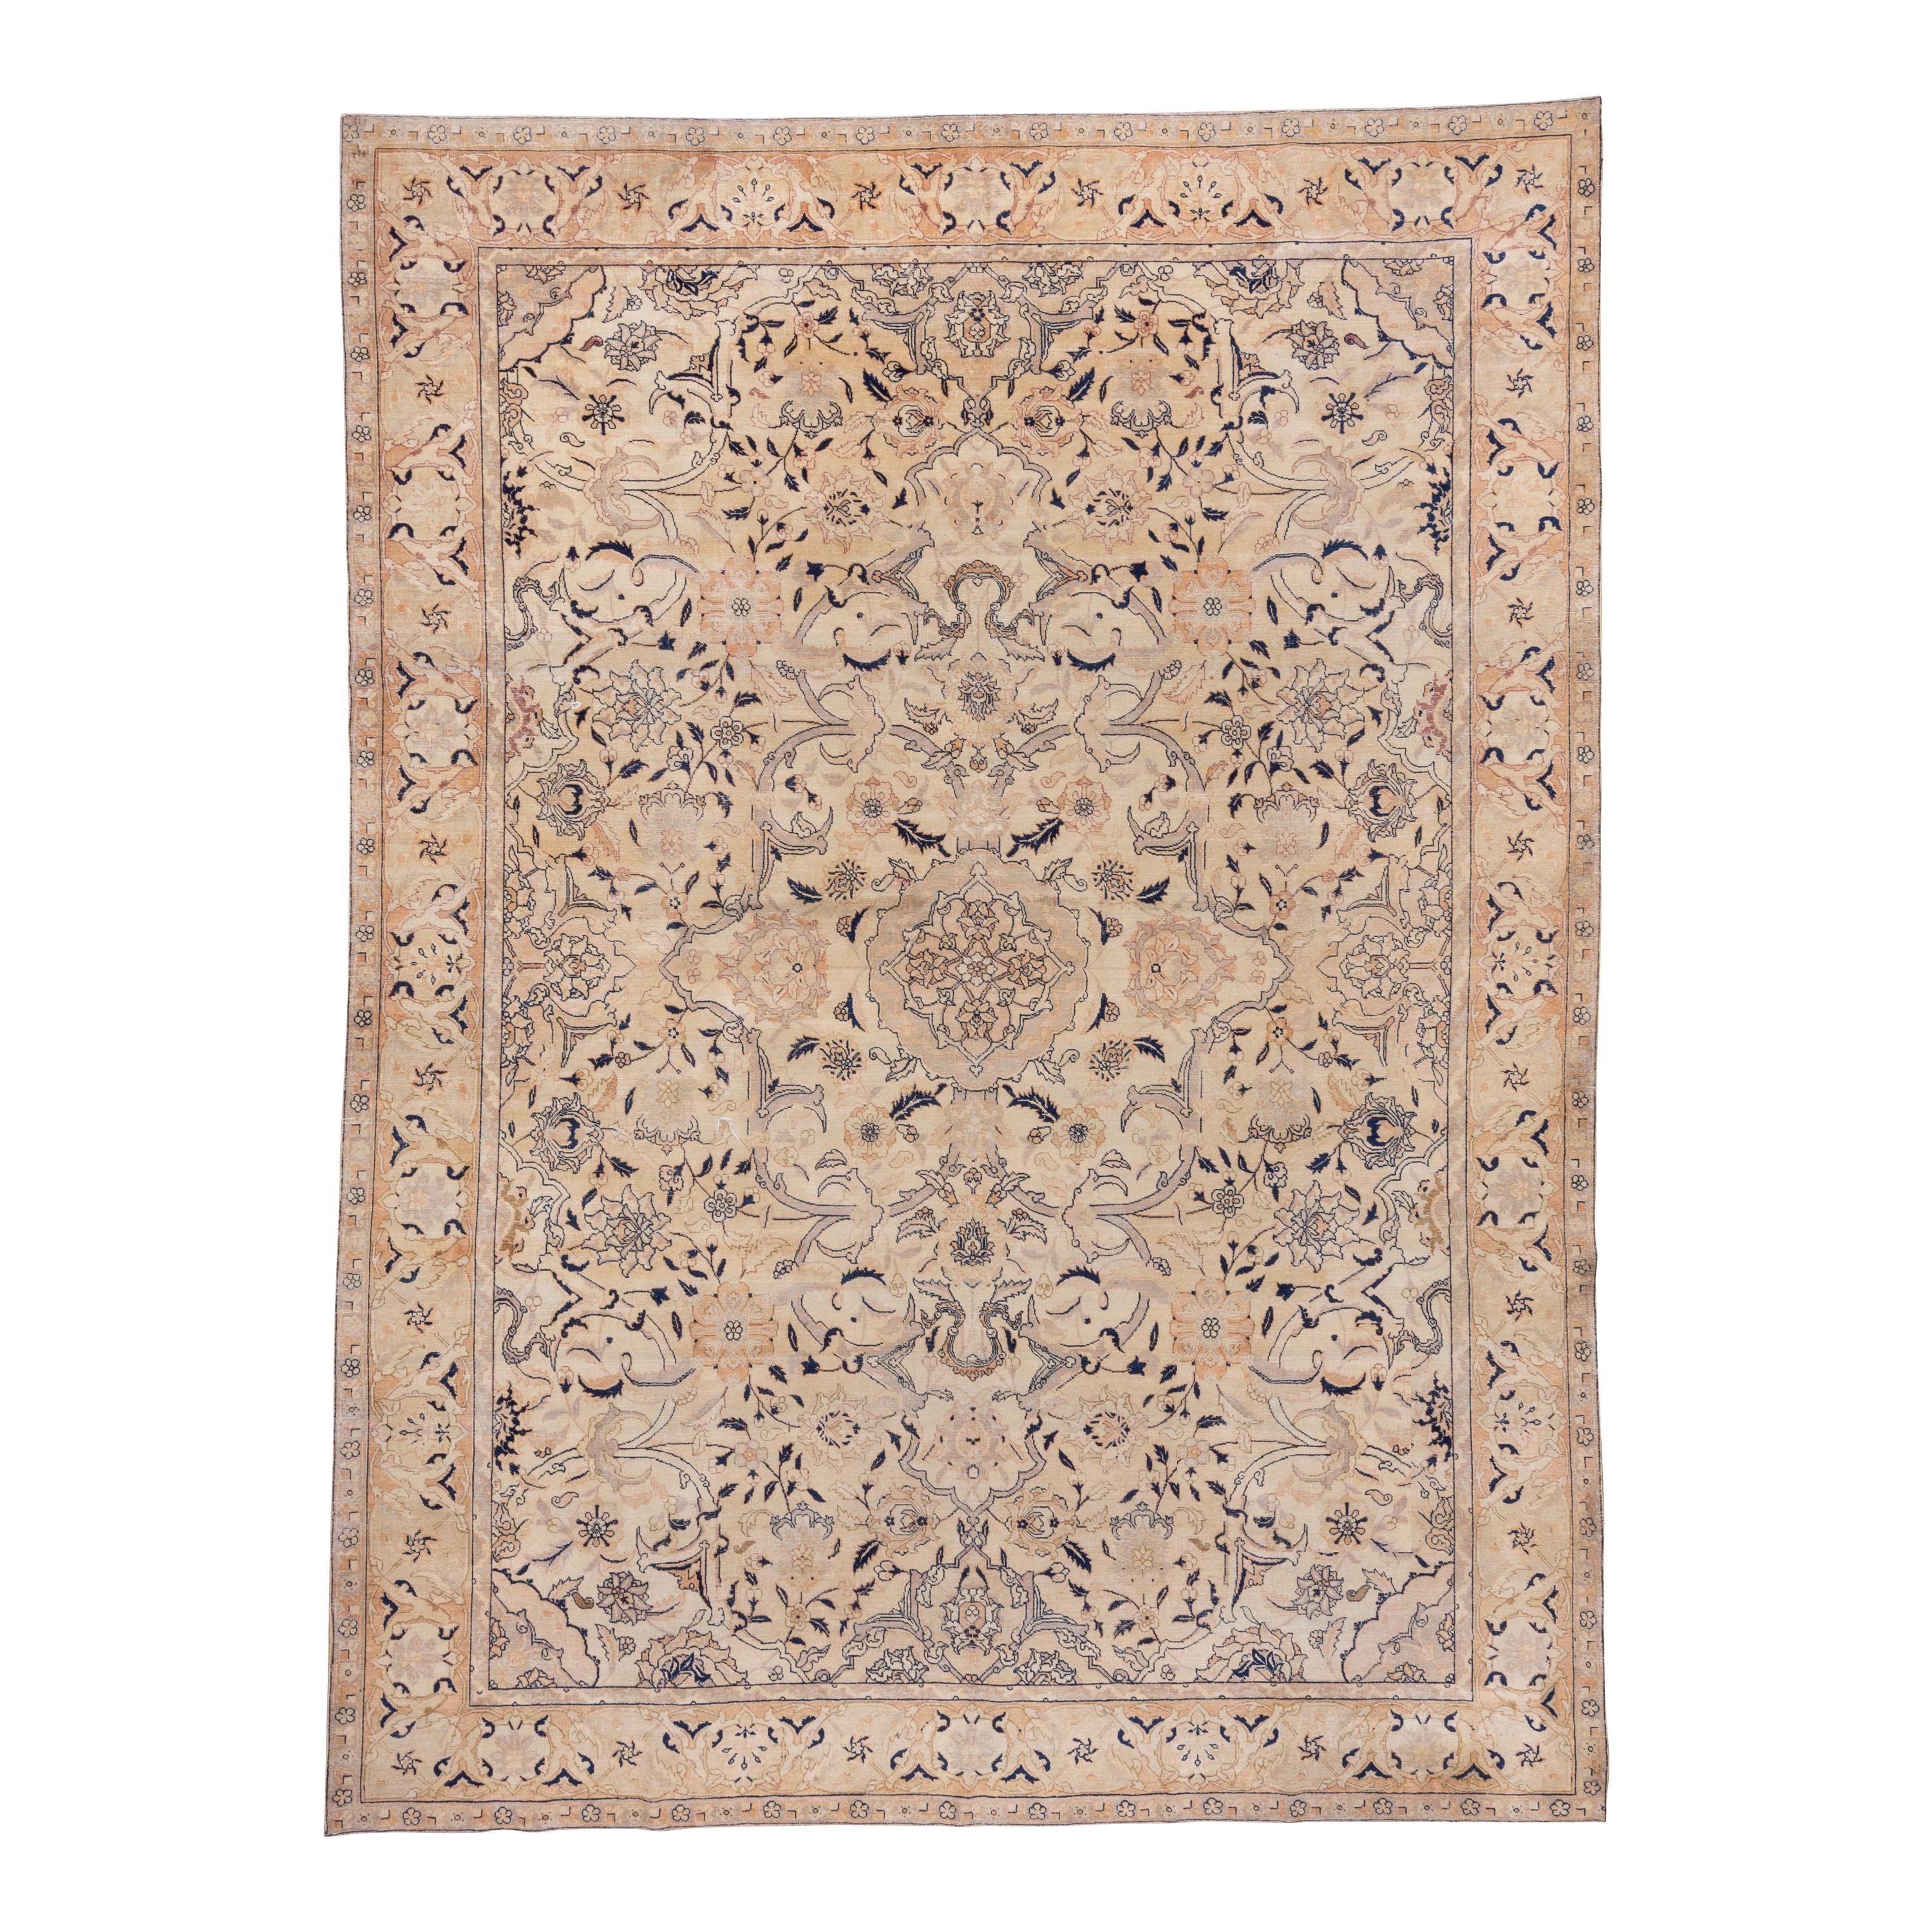 Antique Persian Tabriz Carpet, All-Over Field, Soft Palette, Navy Accents